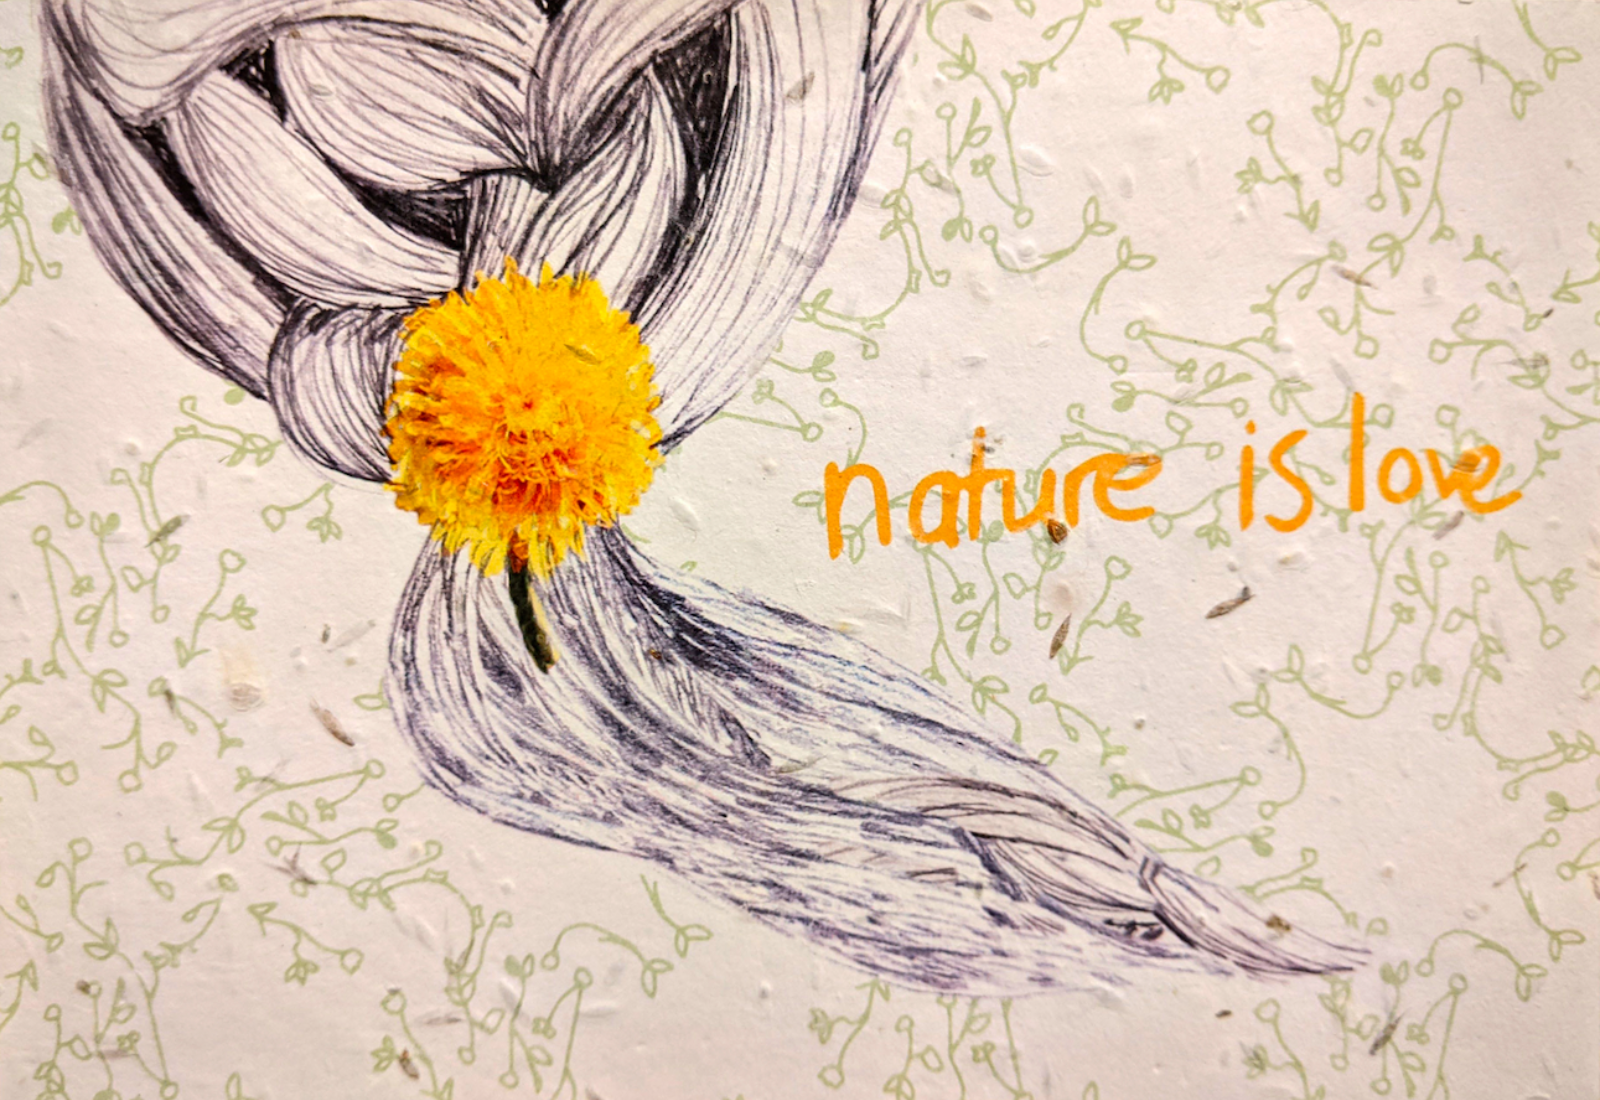 A black line drawing of some plaited hair with a yellow flower in. The words 'nature is love' in yellow text, all on a green patterned background.